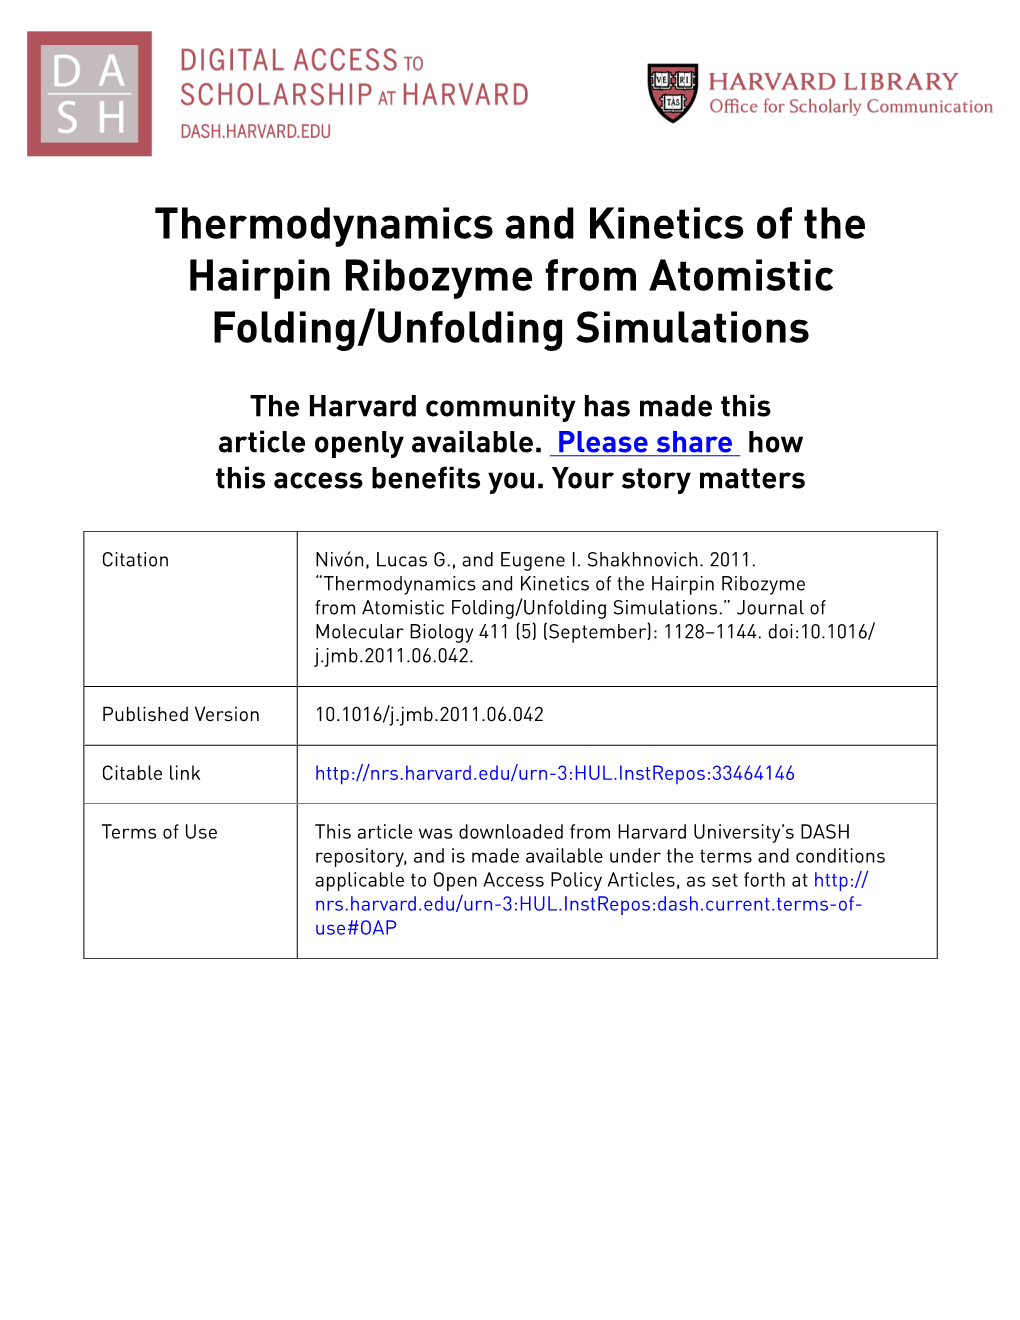 Thermodynamics and Kinetics of the Hairpin Ribozyme from Atomistic Folding/Unfolding Simulations